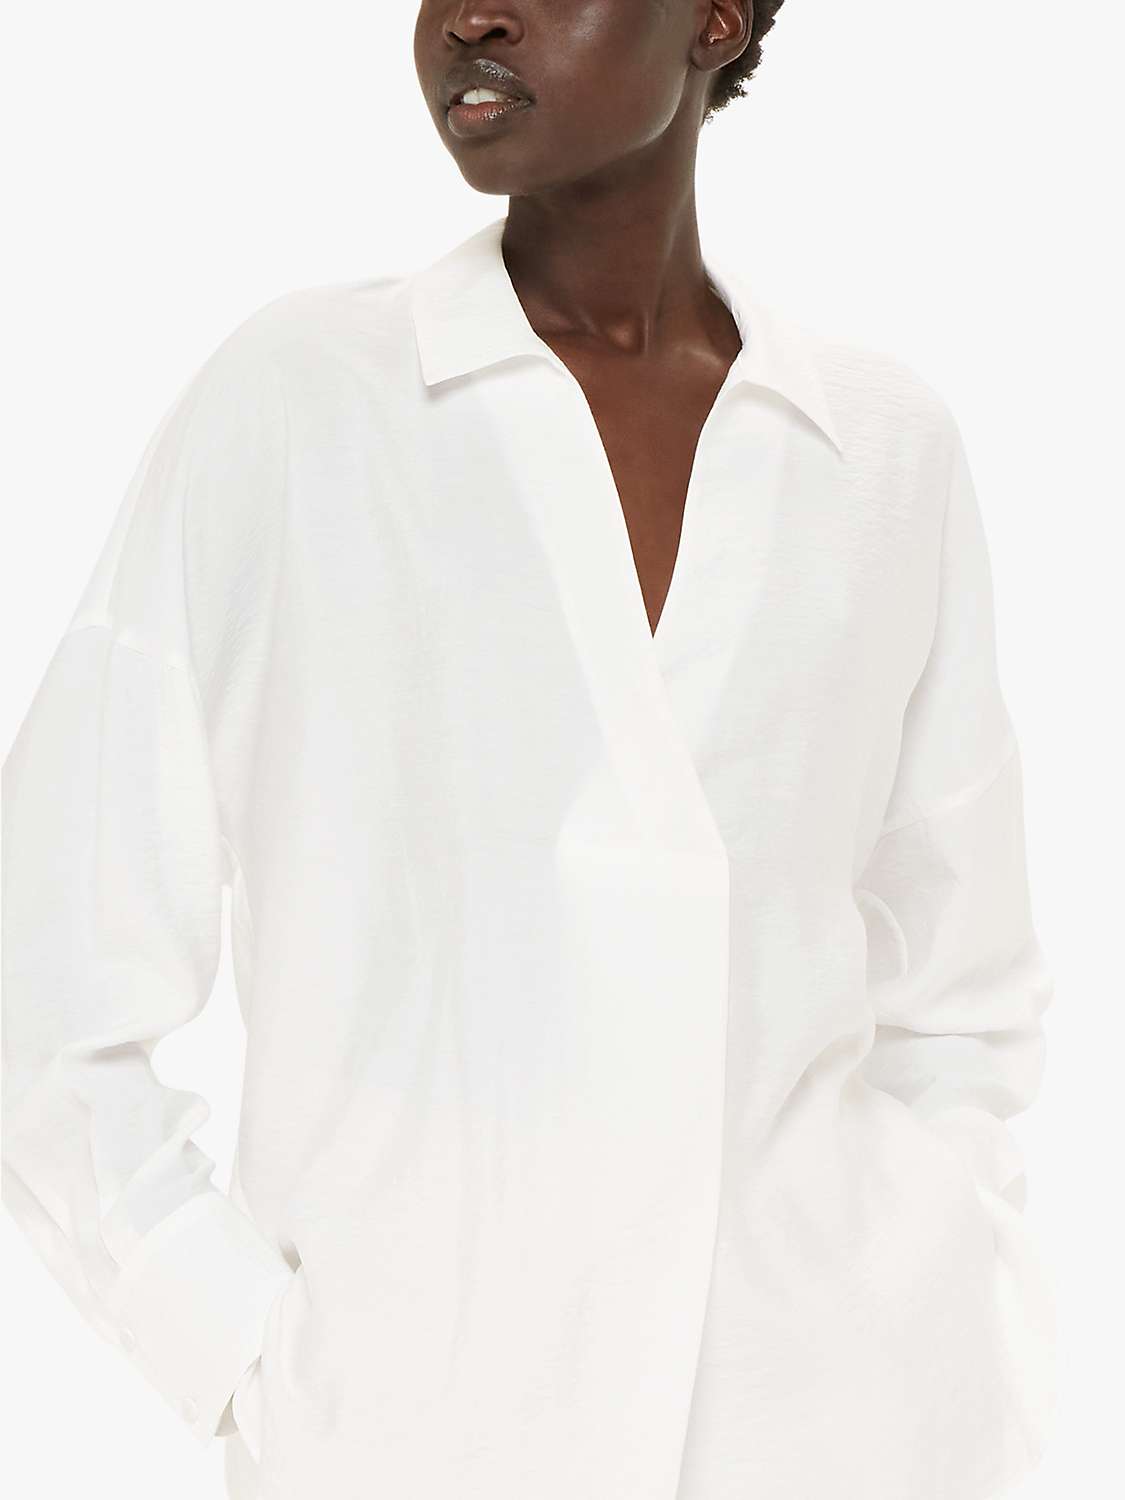 Buy Whistles Riley Plain Tunic Top, White Online at johnlewis.com